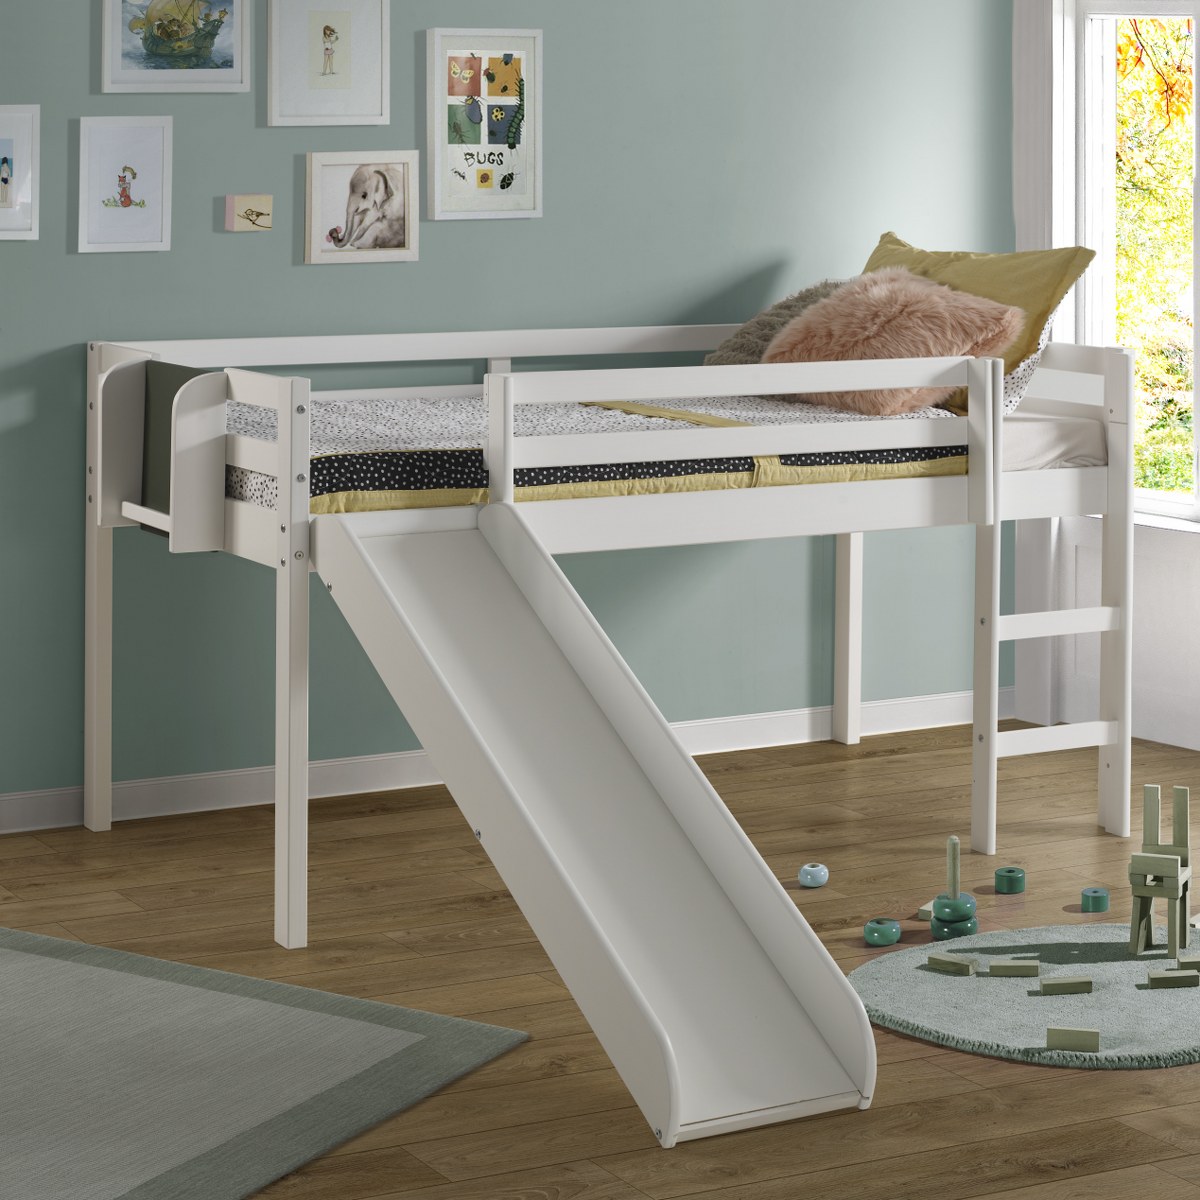 Naomi Home Cindy Low Loft Bed With Fun, Loft Bed With Slide Assembly Instructions